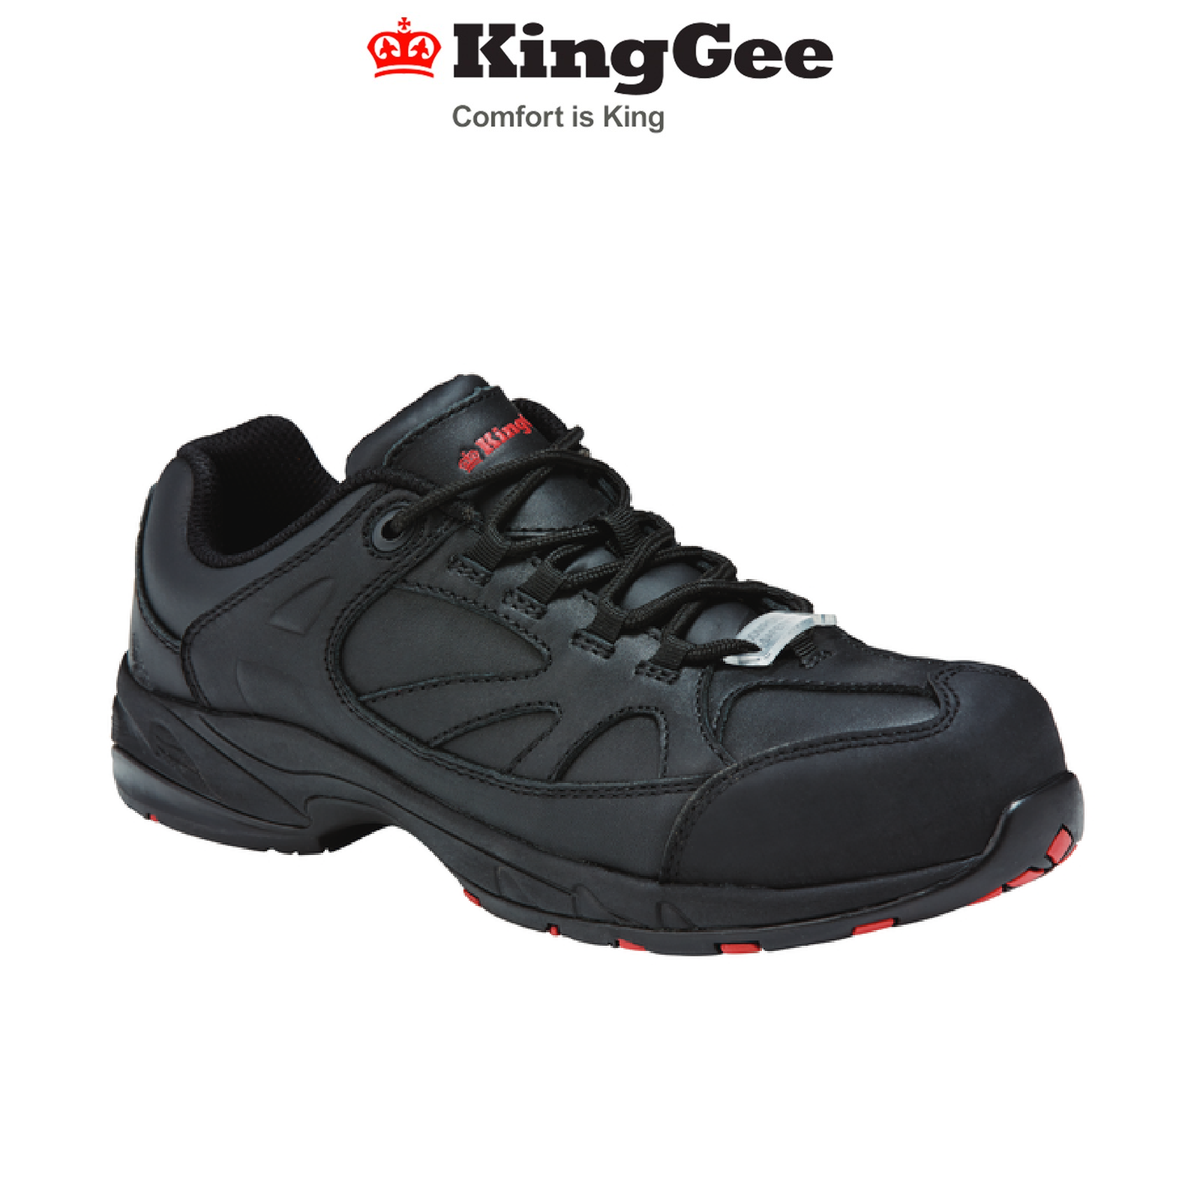 KingGee Womens Comp-Tec G7 Sports Safety Lightweight Work Shoes Boots K26610